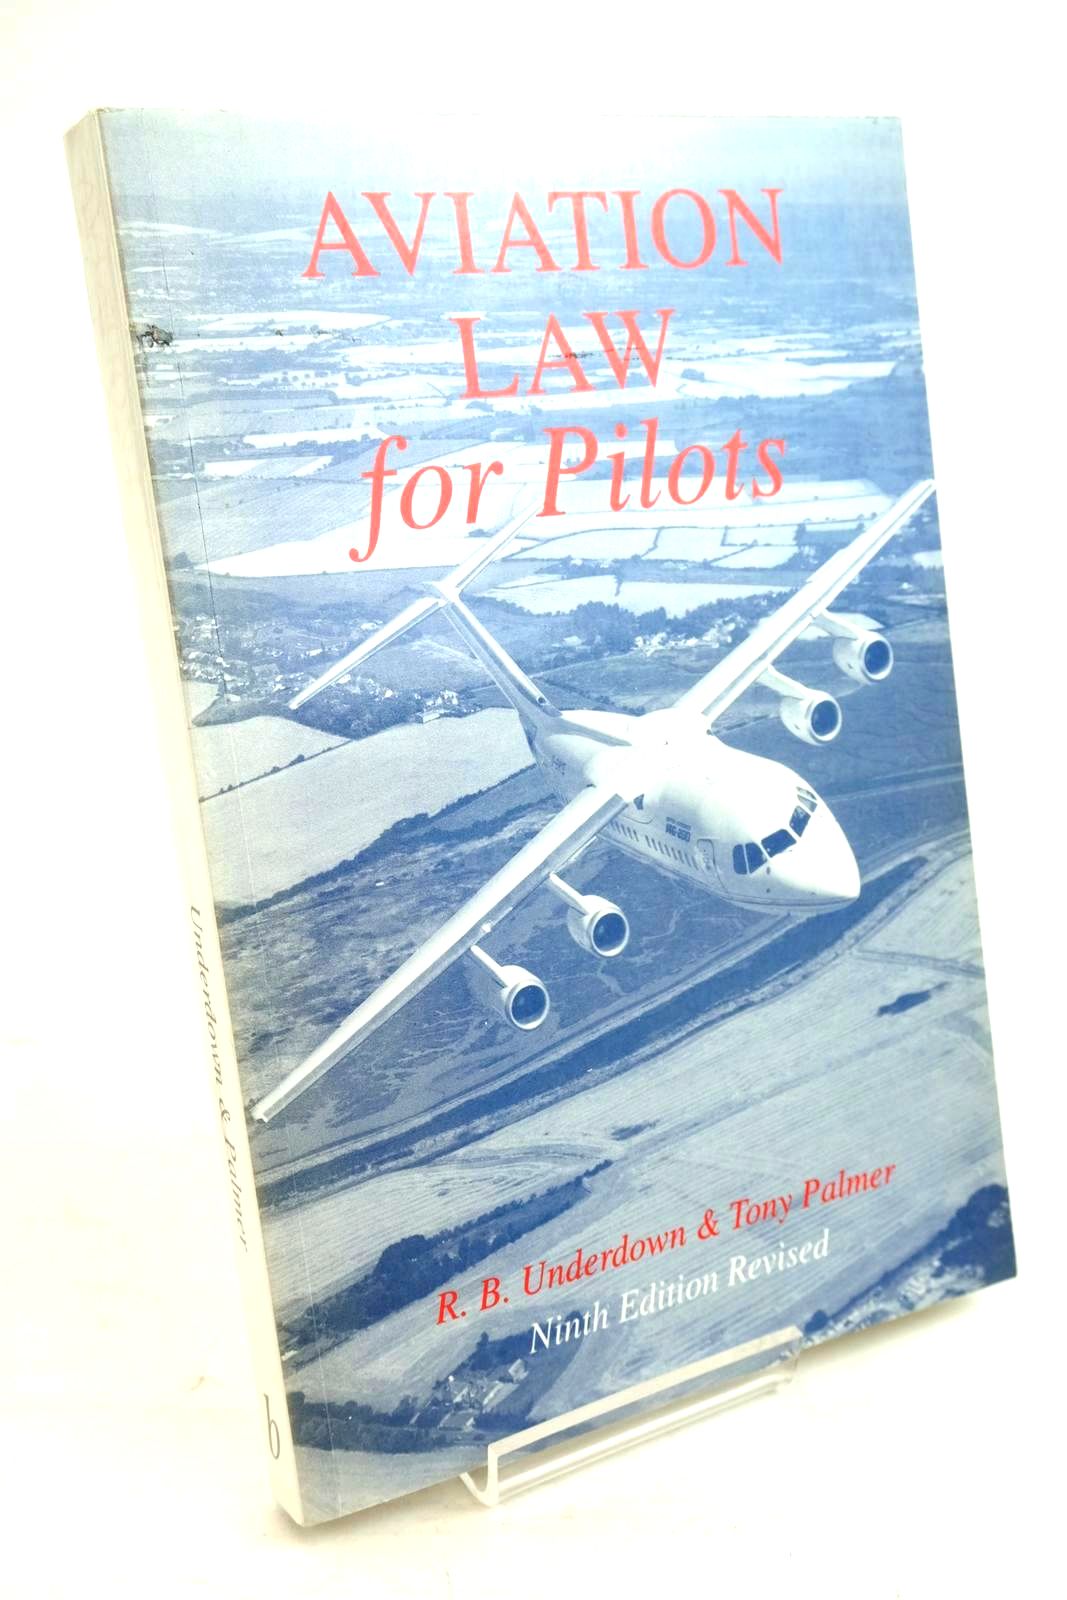 Photo of AVIATION LAW FOR PILOTS written by Underdown, R.B. Palmer, Tony published by Blackwell Science (STOCK CODE: 1320285)  for sale by Stella & Rose's Books